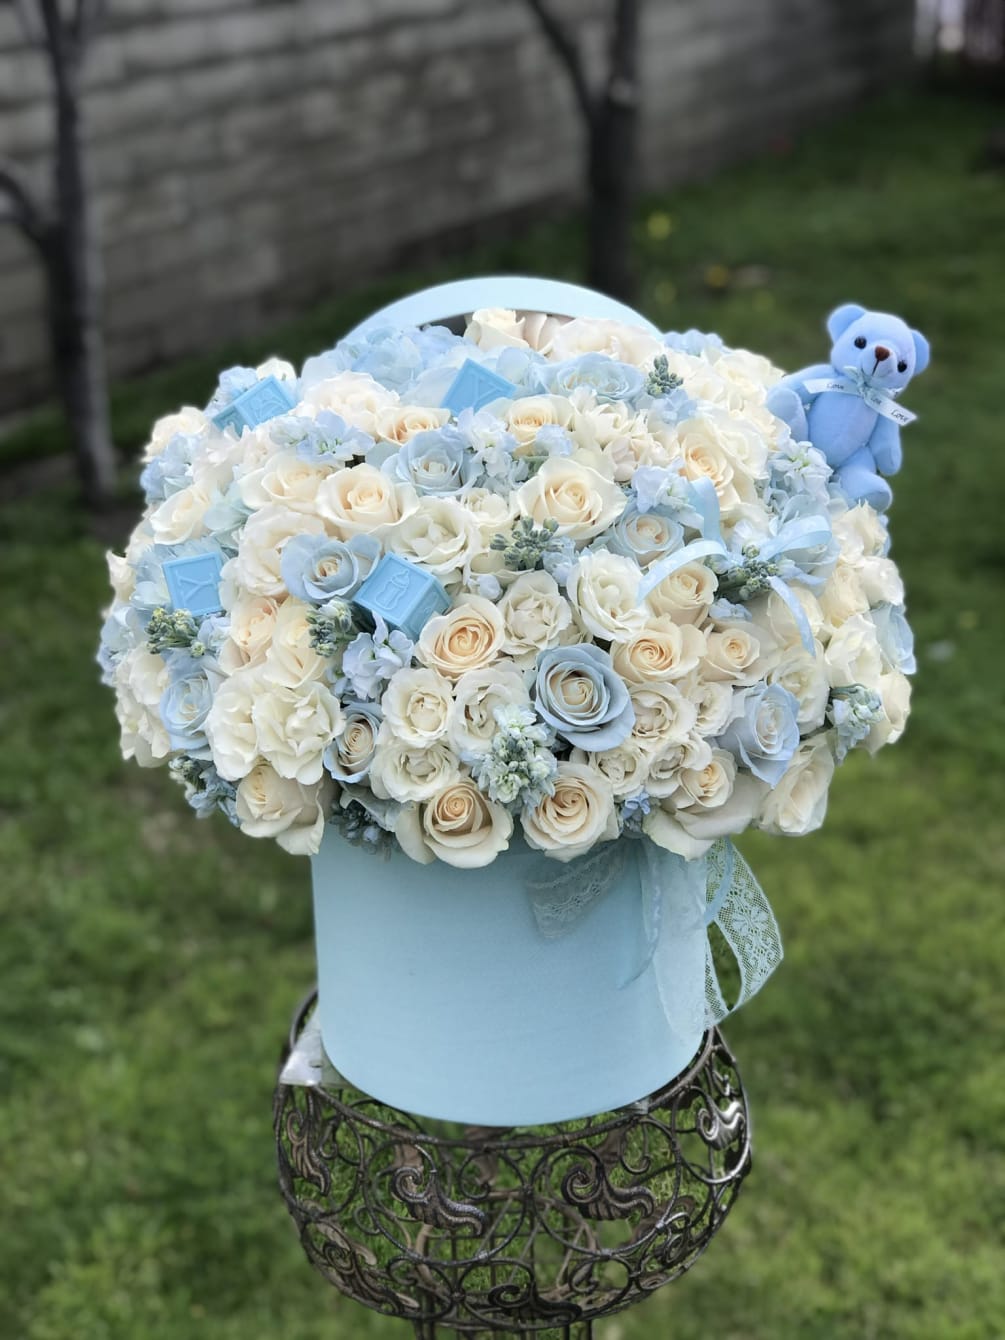 Welcome baby boy arrangement. Full of roses, spray roses, hydrangeas and stock.